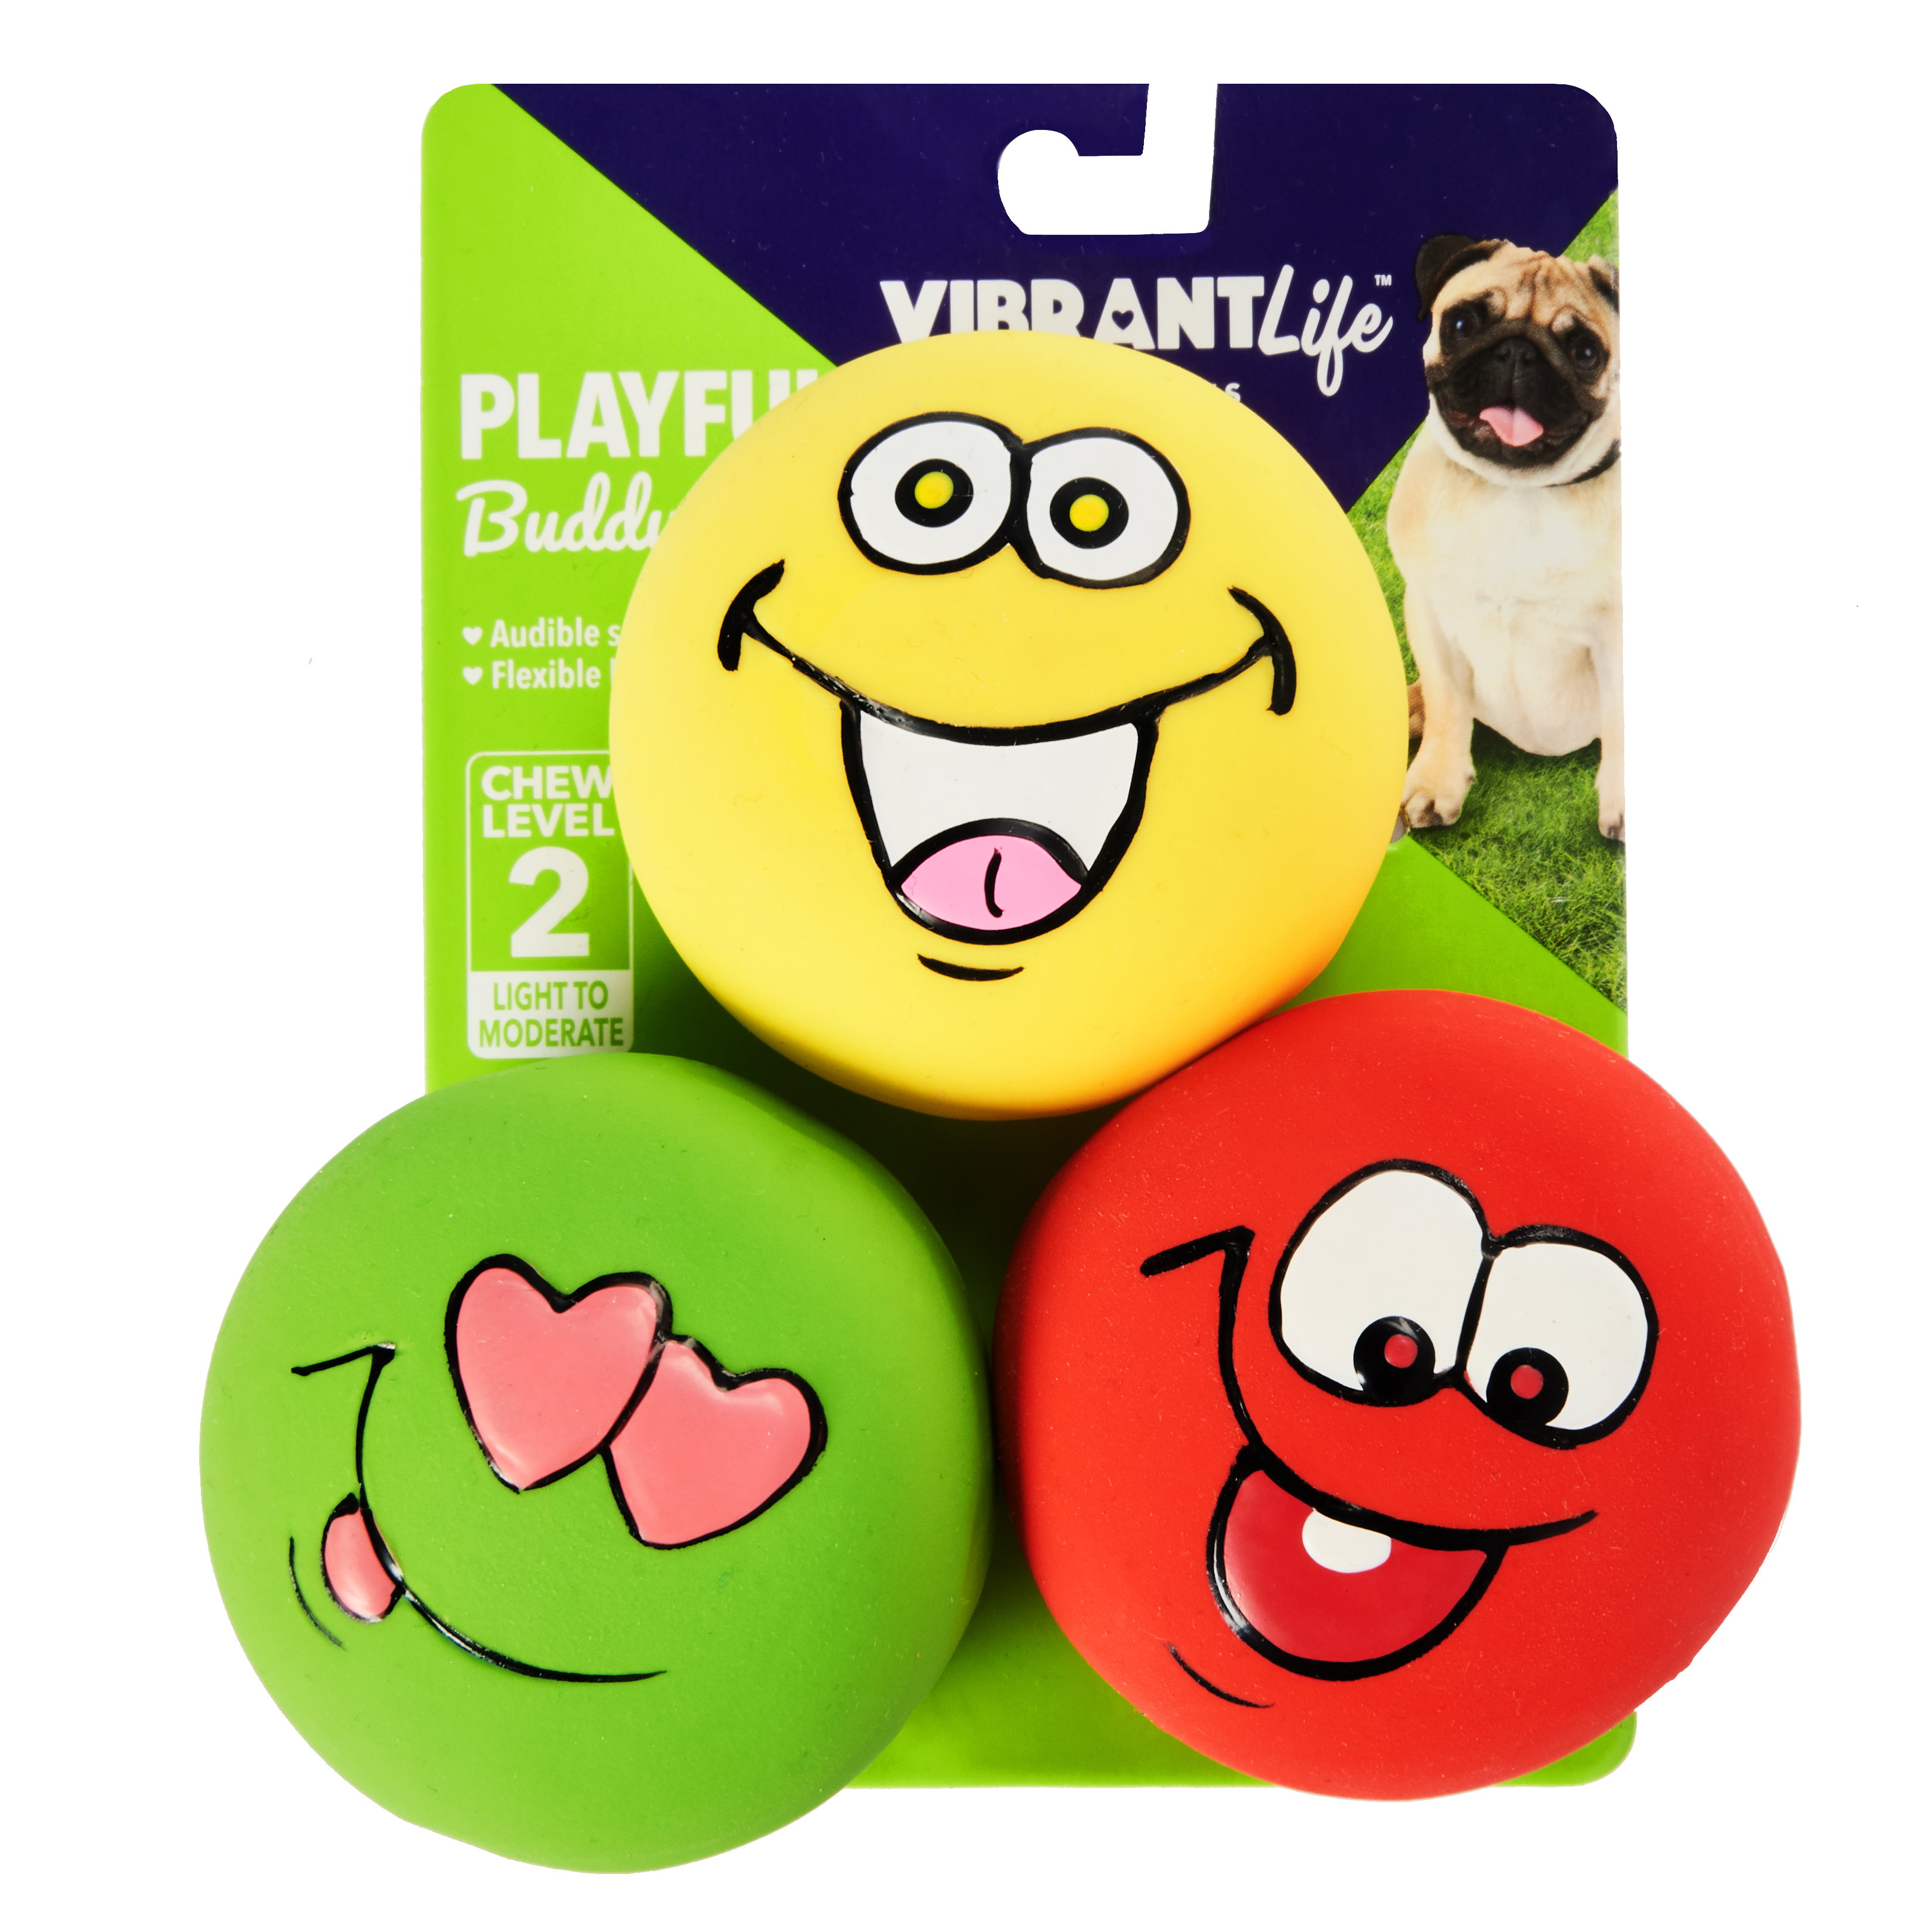 Vibrant Life Playful Buddy Emoticon Dog Chew Toy, Chew Level 2, 3 Count - image 3 of 6